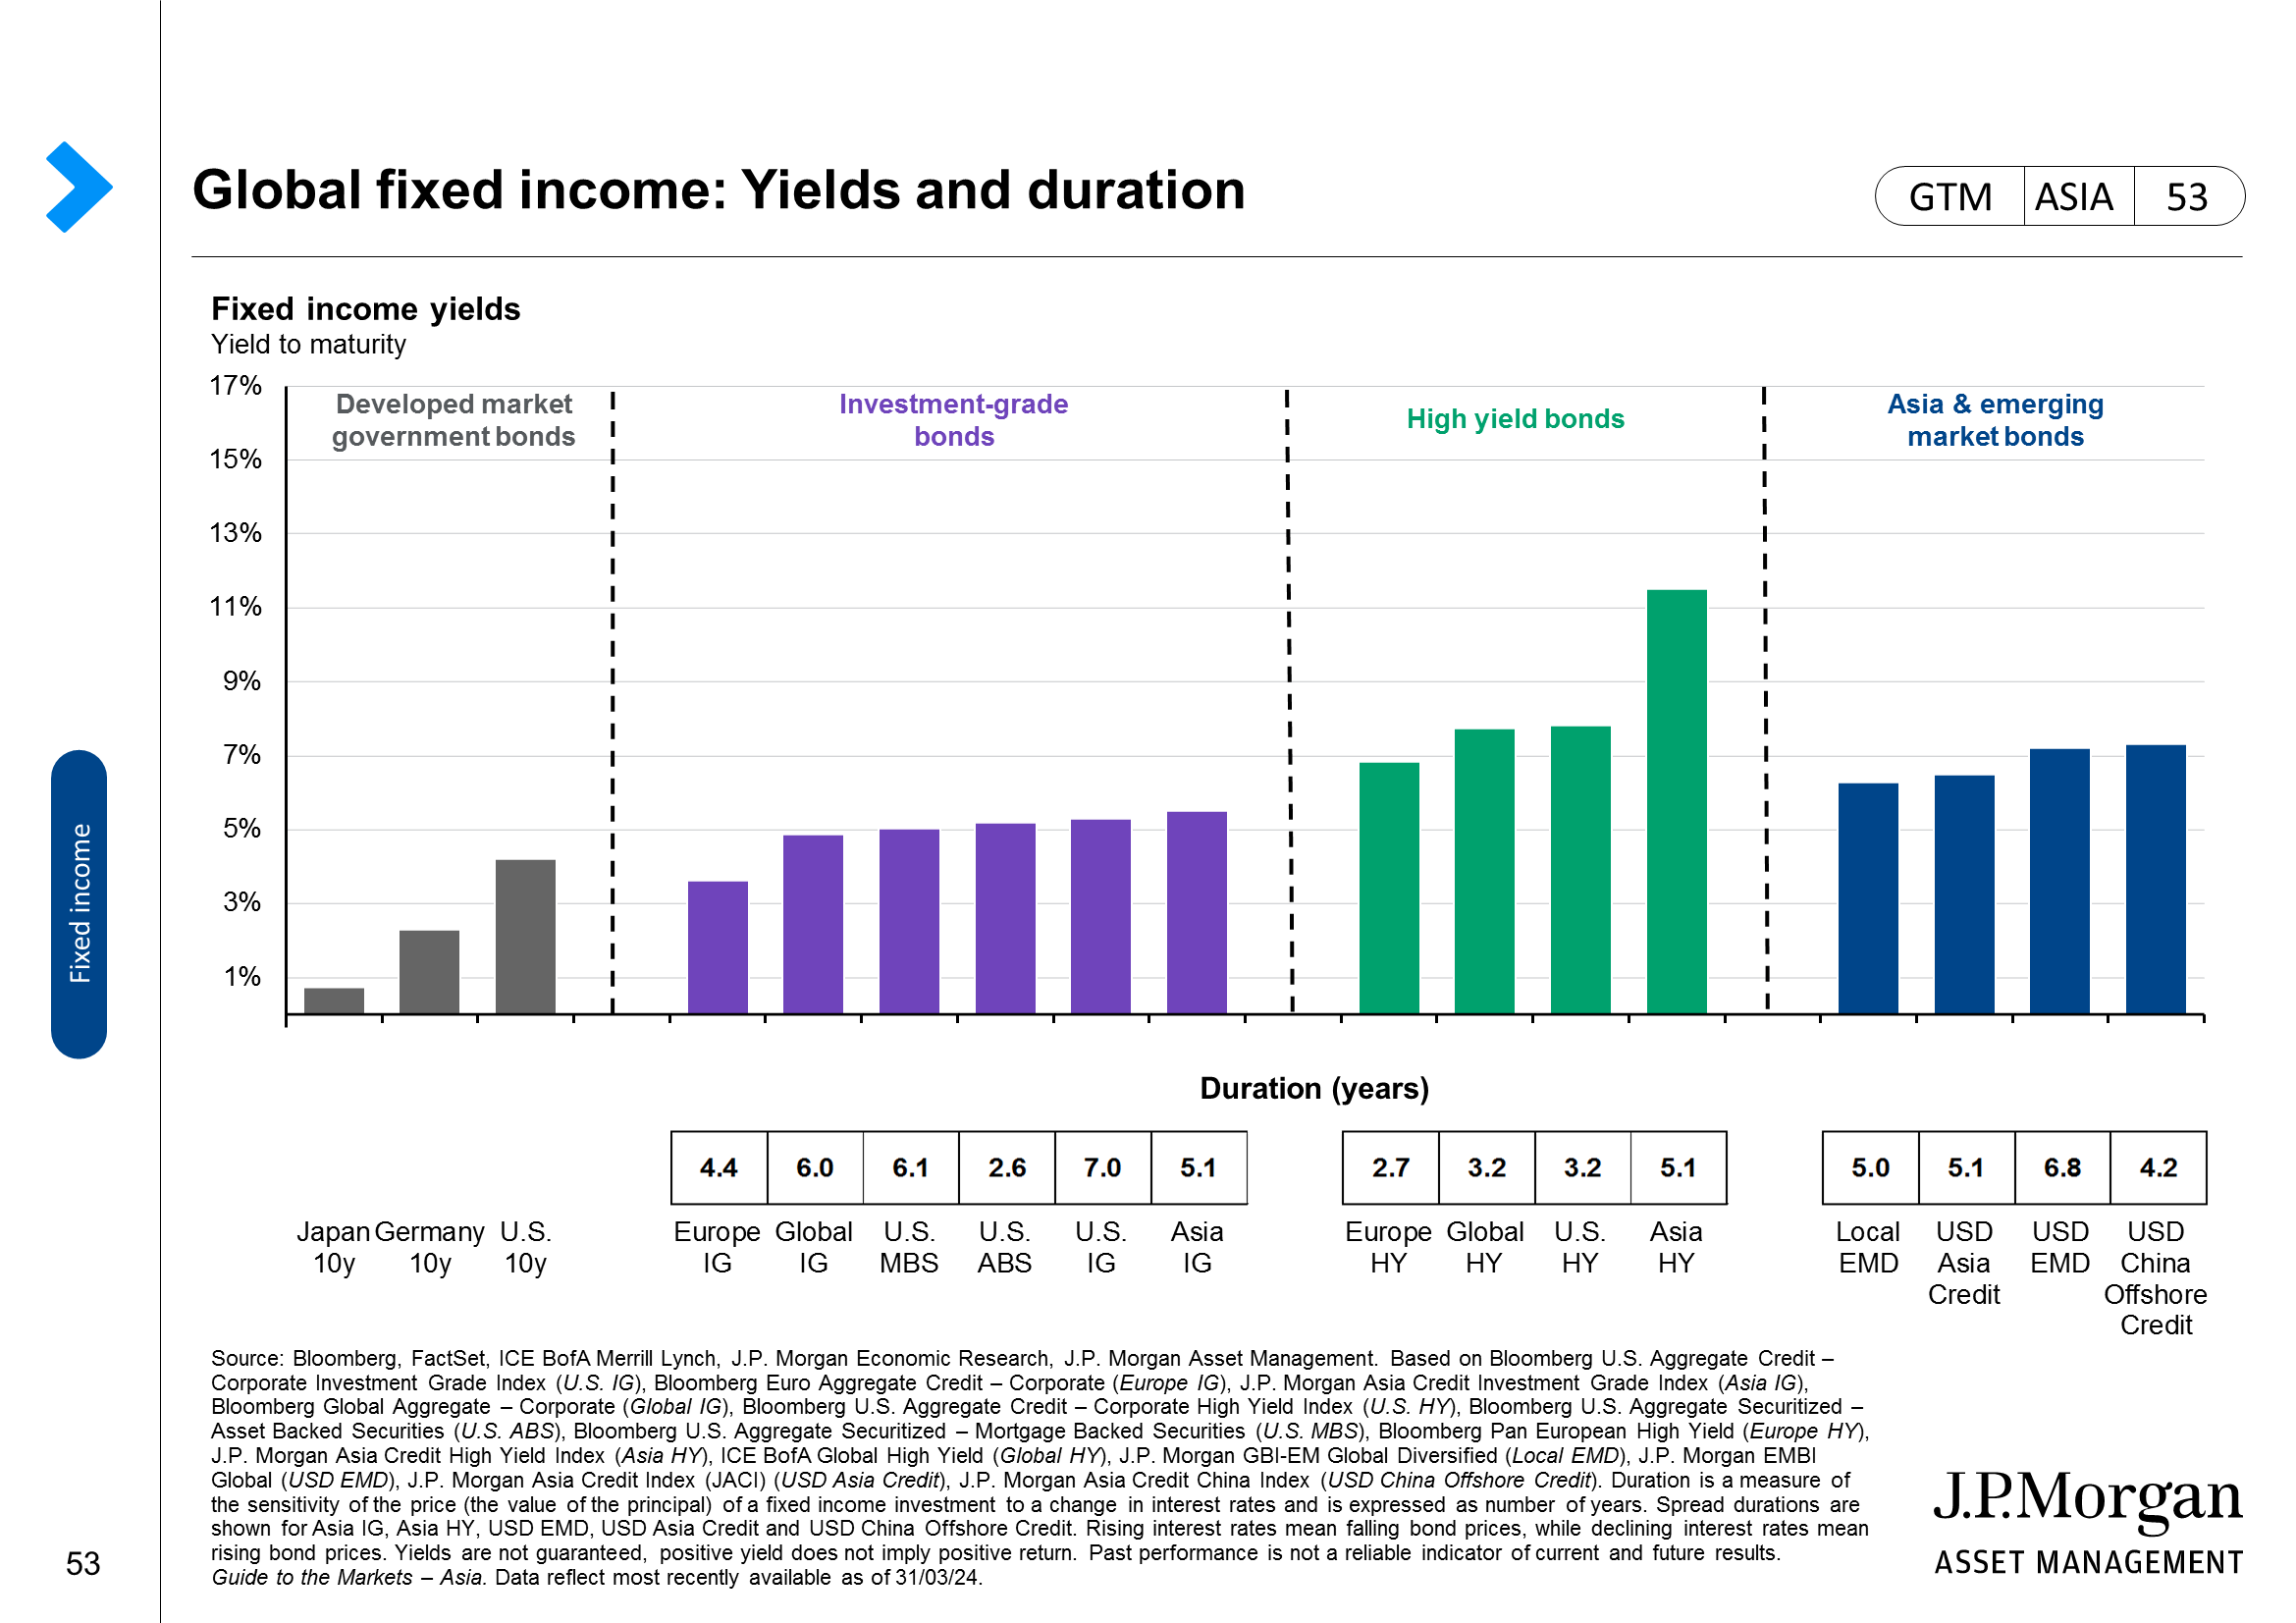 Global fixed income: Government bond yields and expected inflation